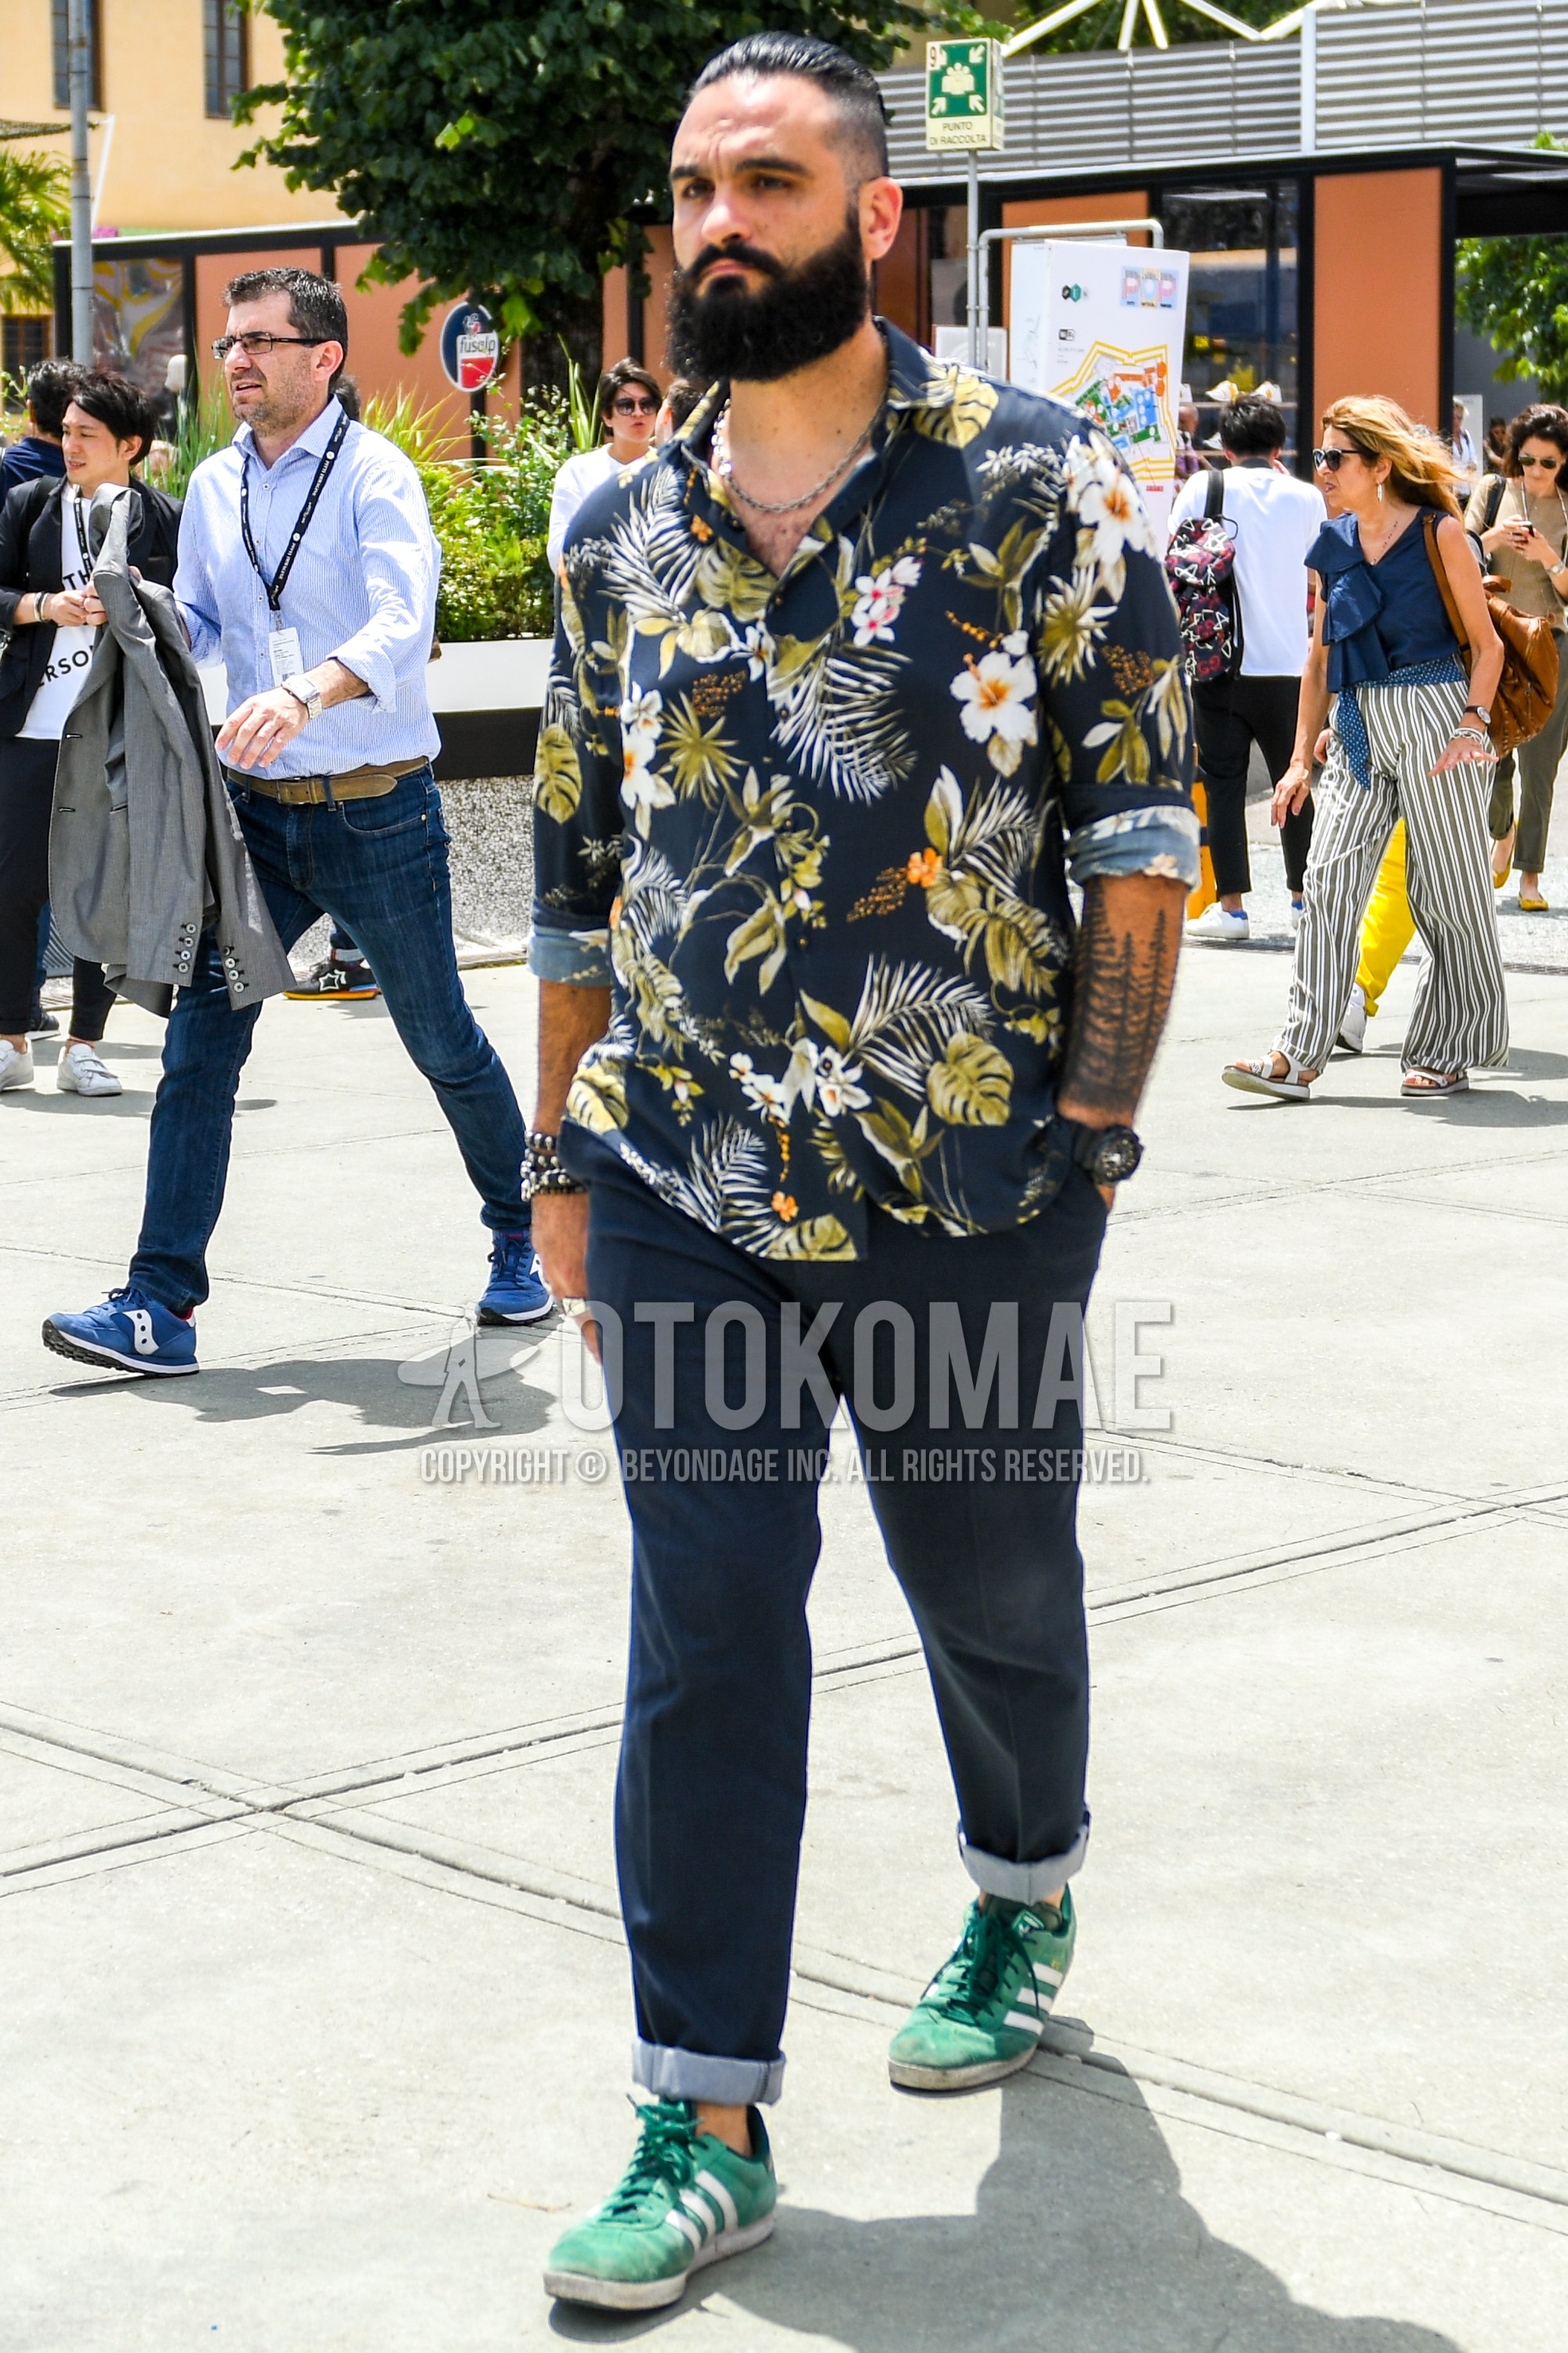 Men's summer outfit with navy botanical shirt, black plain denim/jeans, green low-cut sneakers.